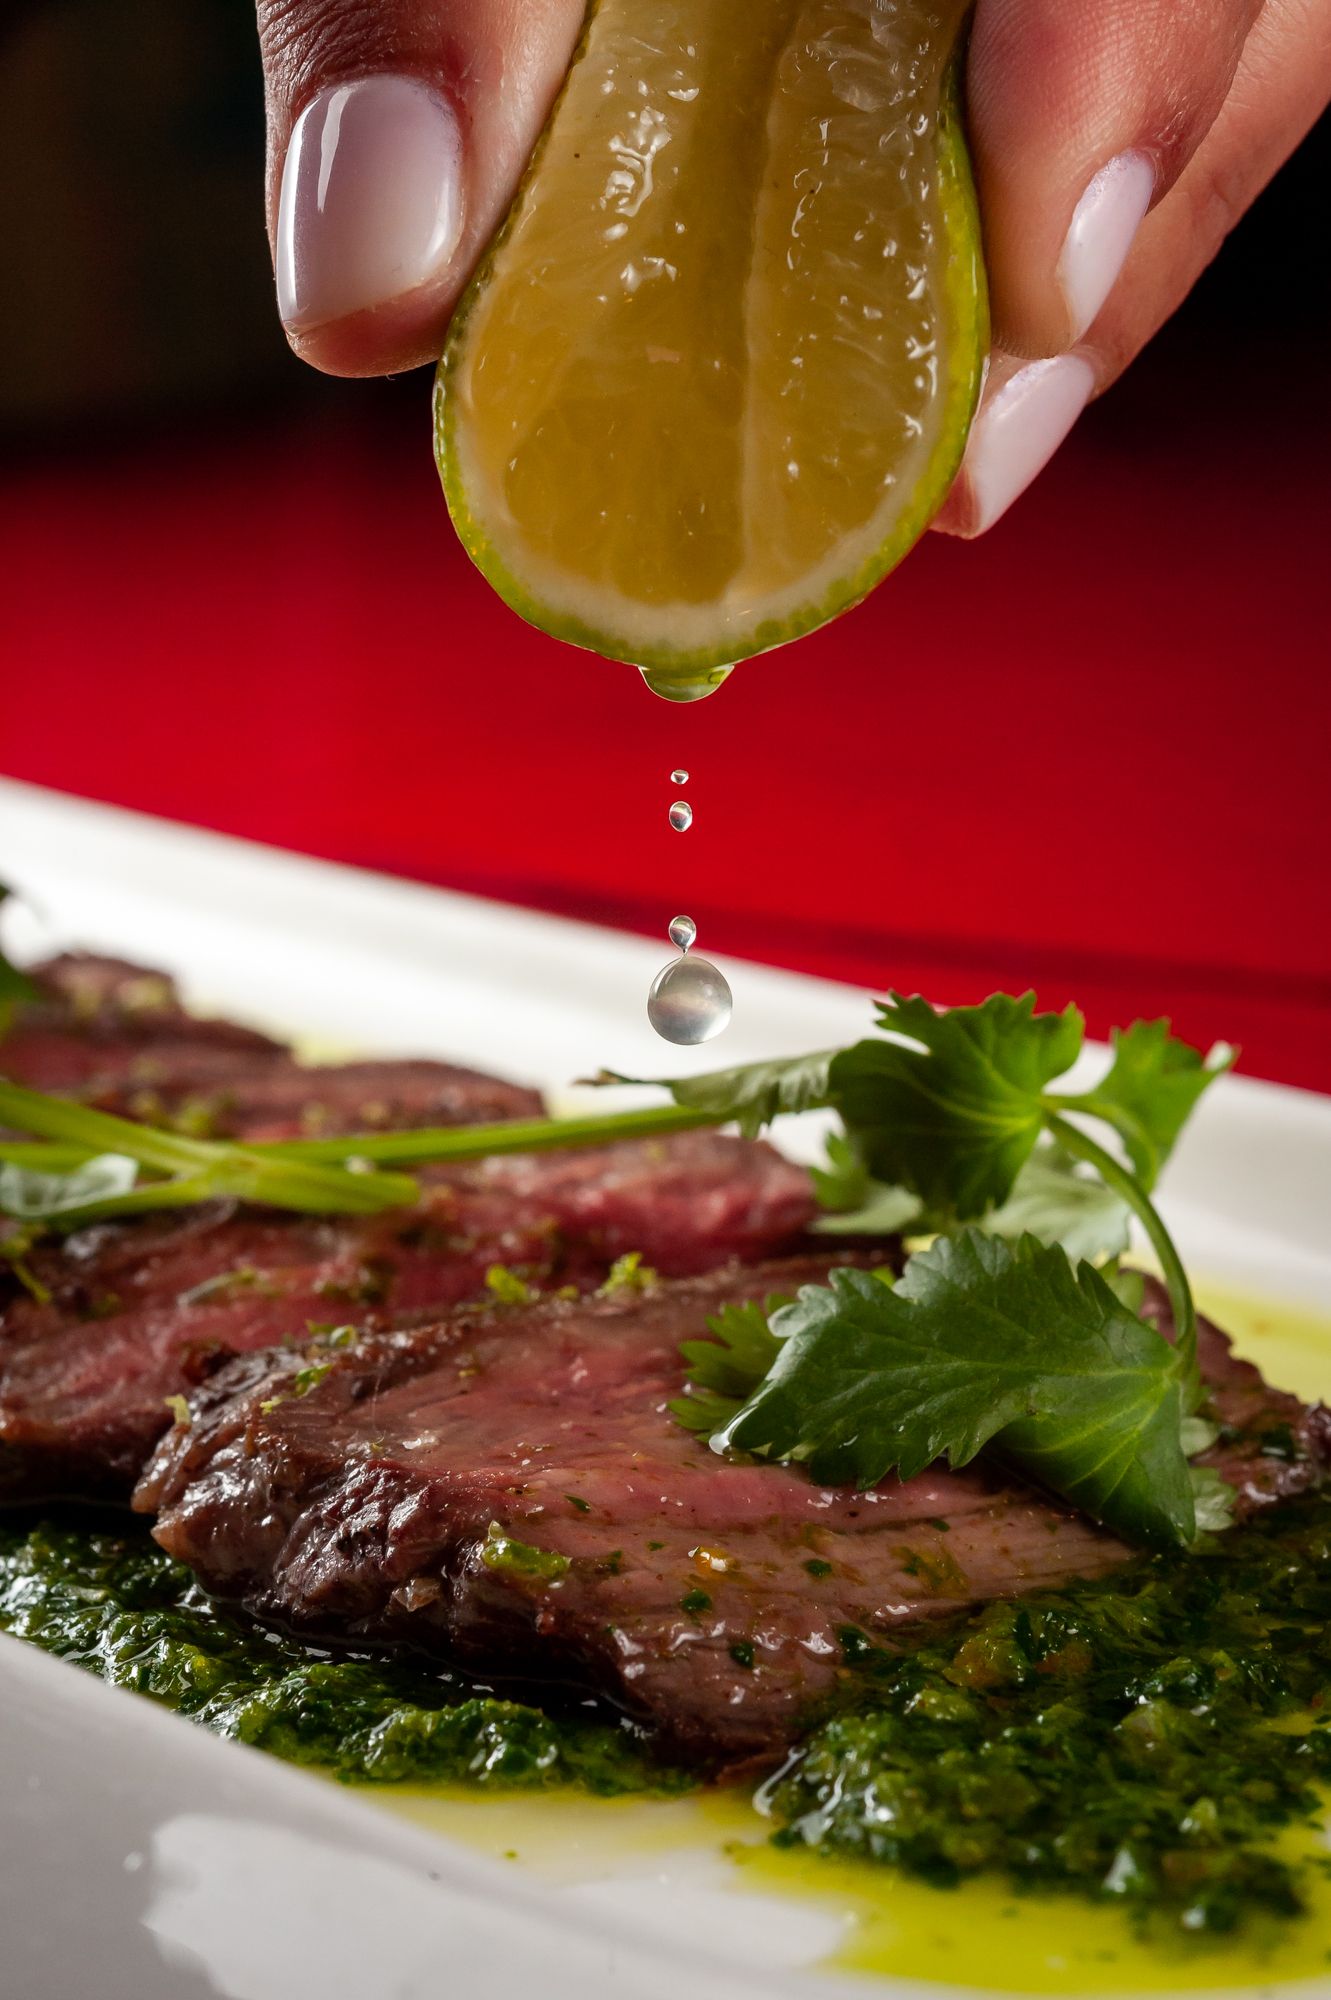 Chimichurri is the best sauce to pair with steak - follow Chef Cesar Perez's easy recipe.